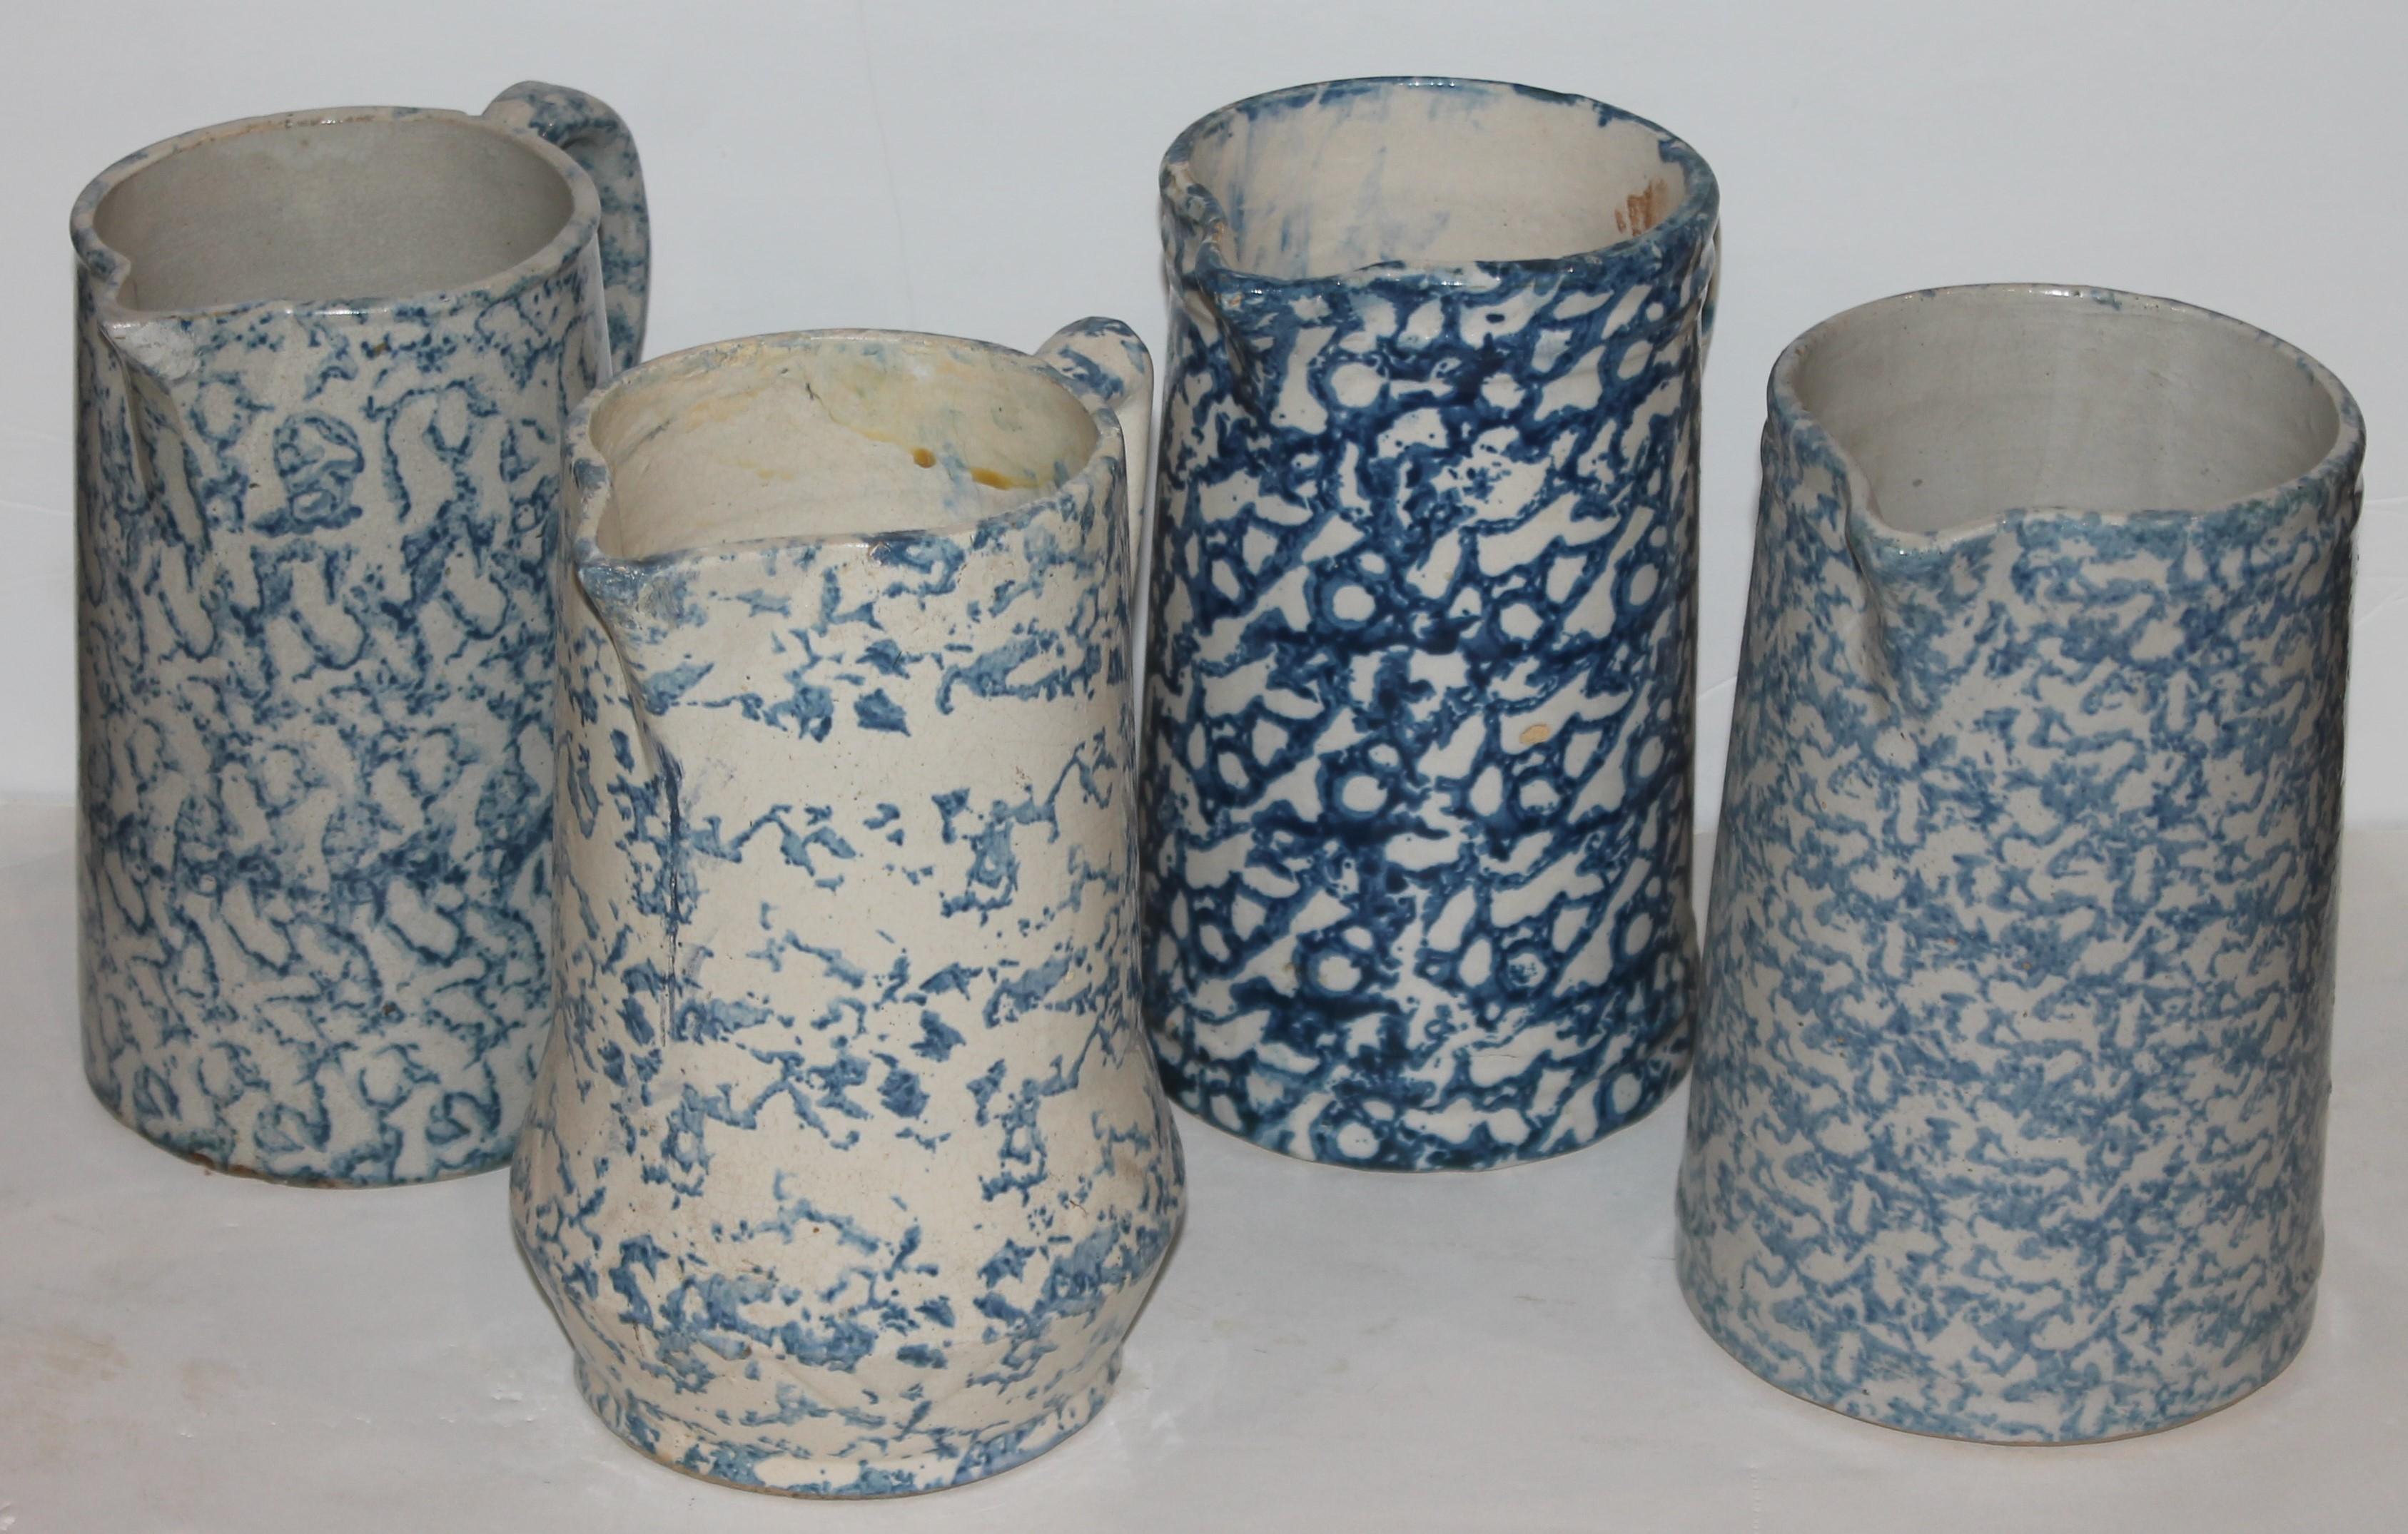 This collection of four pristine condition 19th century sponge ware pitchers and all have different colors and patterns.
Each pitcher measures 9 tall x 7.5 deep x 5 wide.